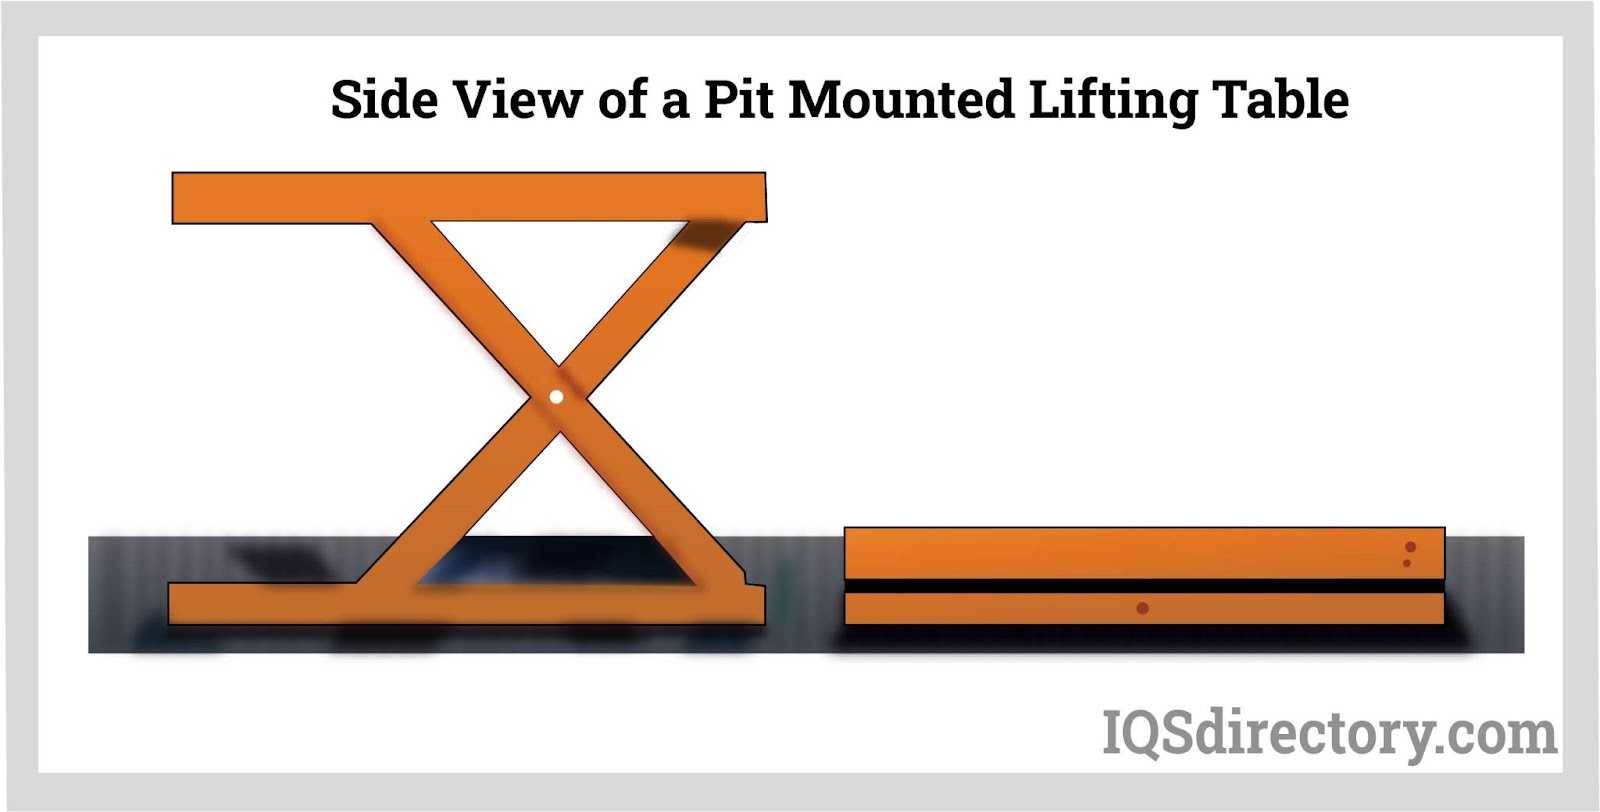 Low Profile Lift Table